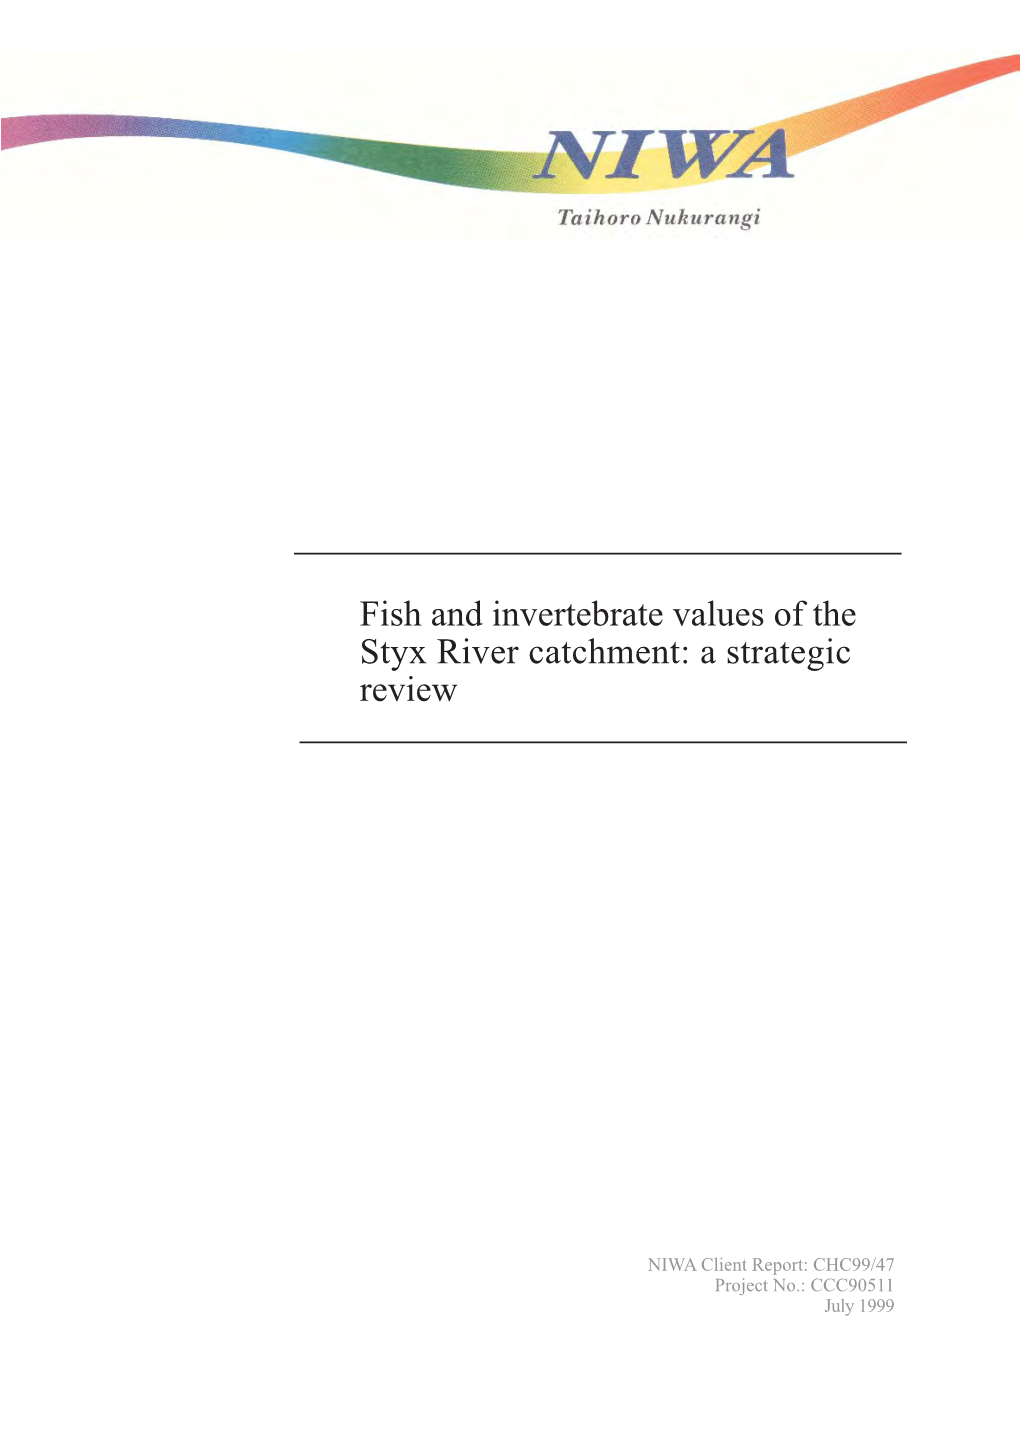 Fish and Invertebrate Values of the Styx River Catchment: a Strategic Review